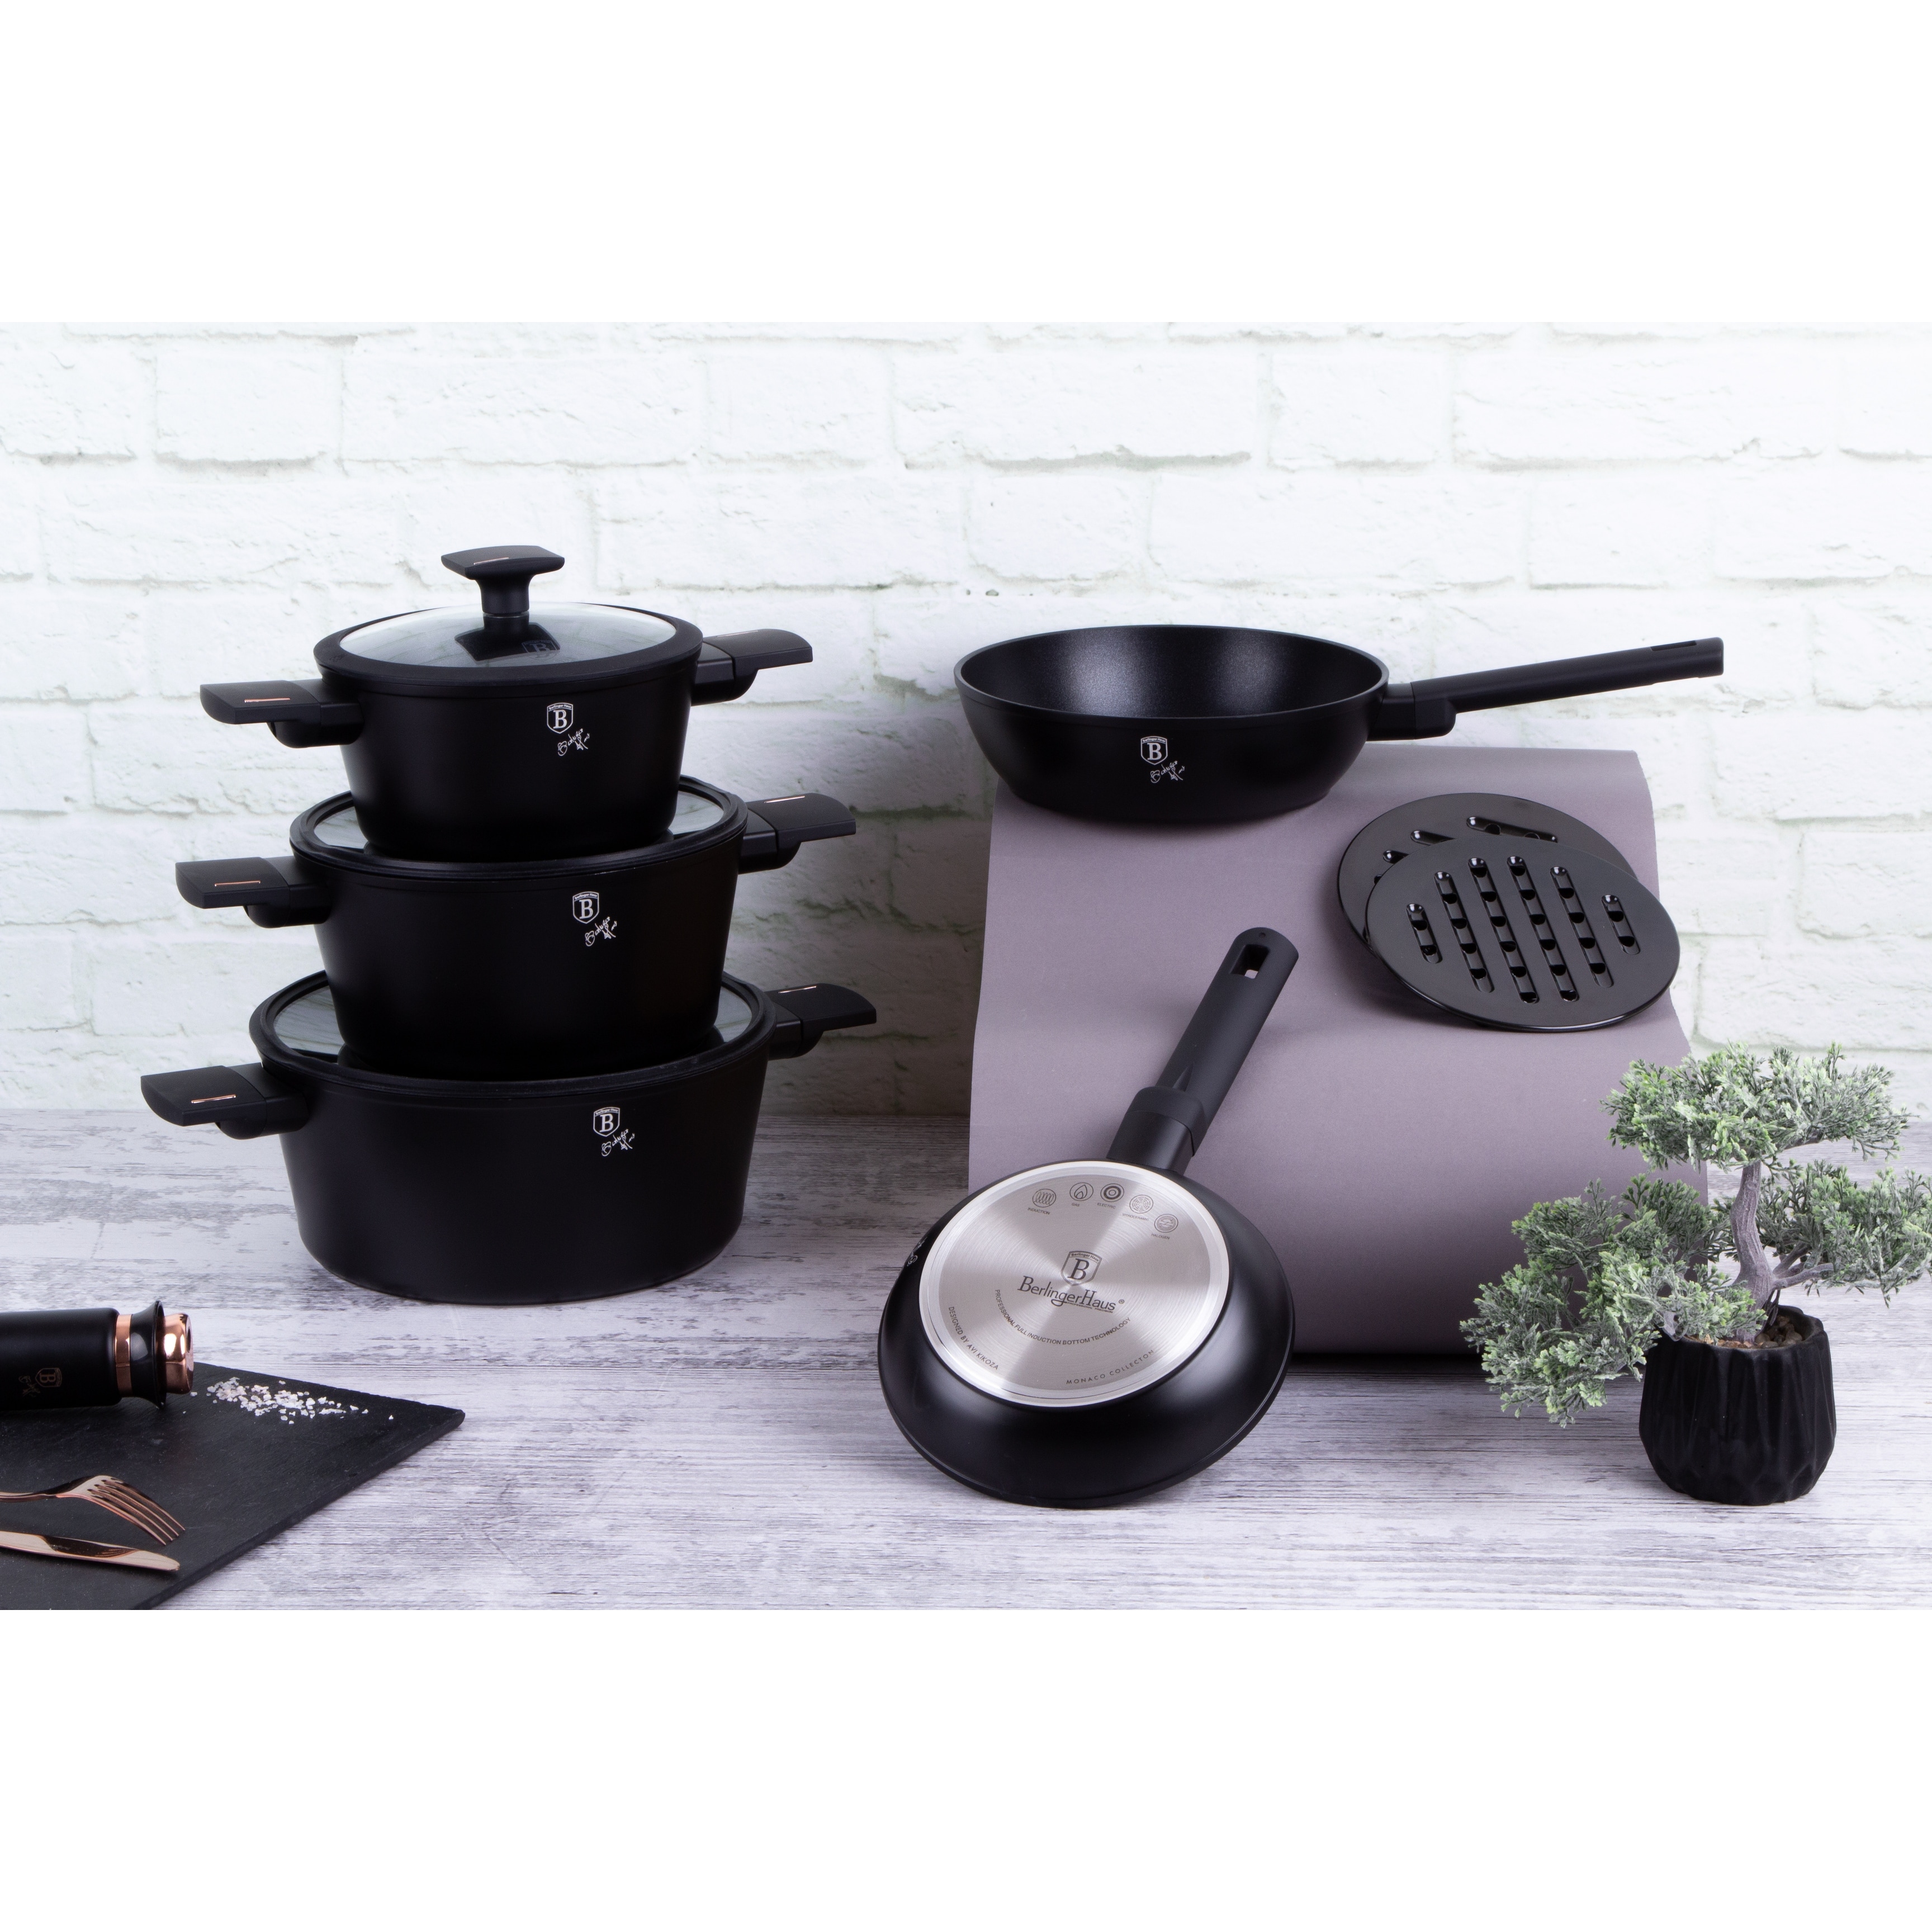 https://ak1.ostkcdn.com/images/products/is/images/direct/3a17441ec2833cd87908f4aebef488ab6d8f231d/Berlinger-Haus-10-Piece-Cookware-Set-Monaco-Collection.jpg